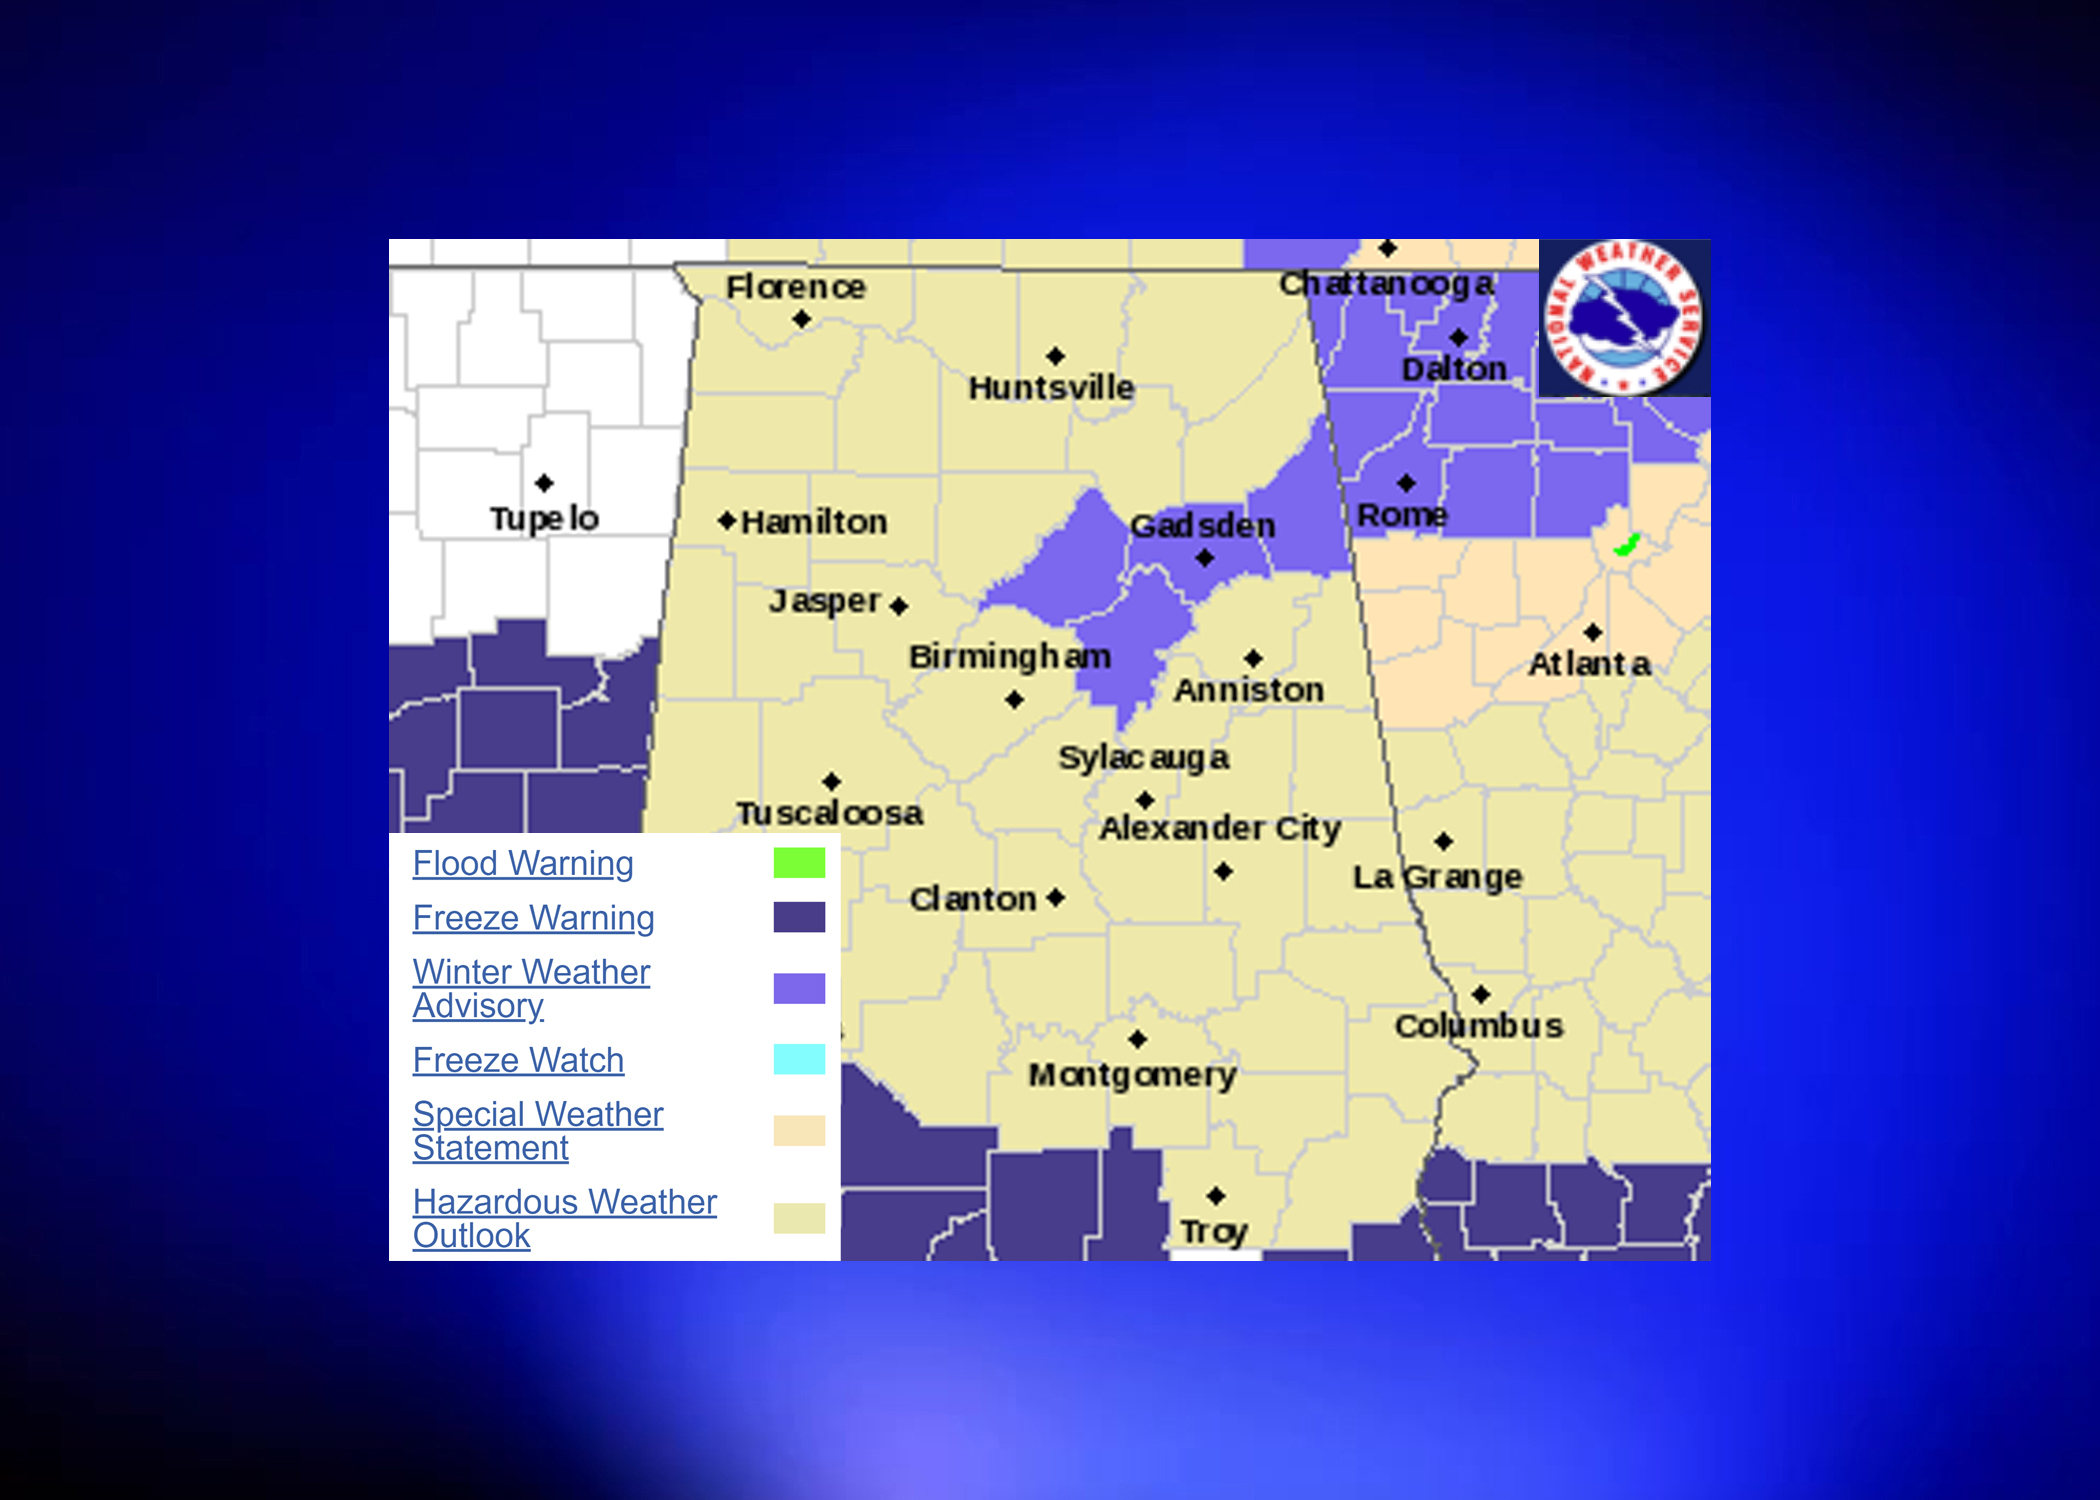 NWS issues Winter Weather Advisory